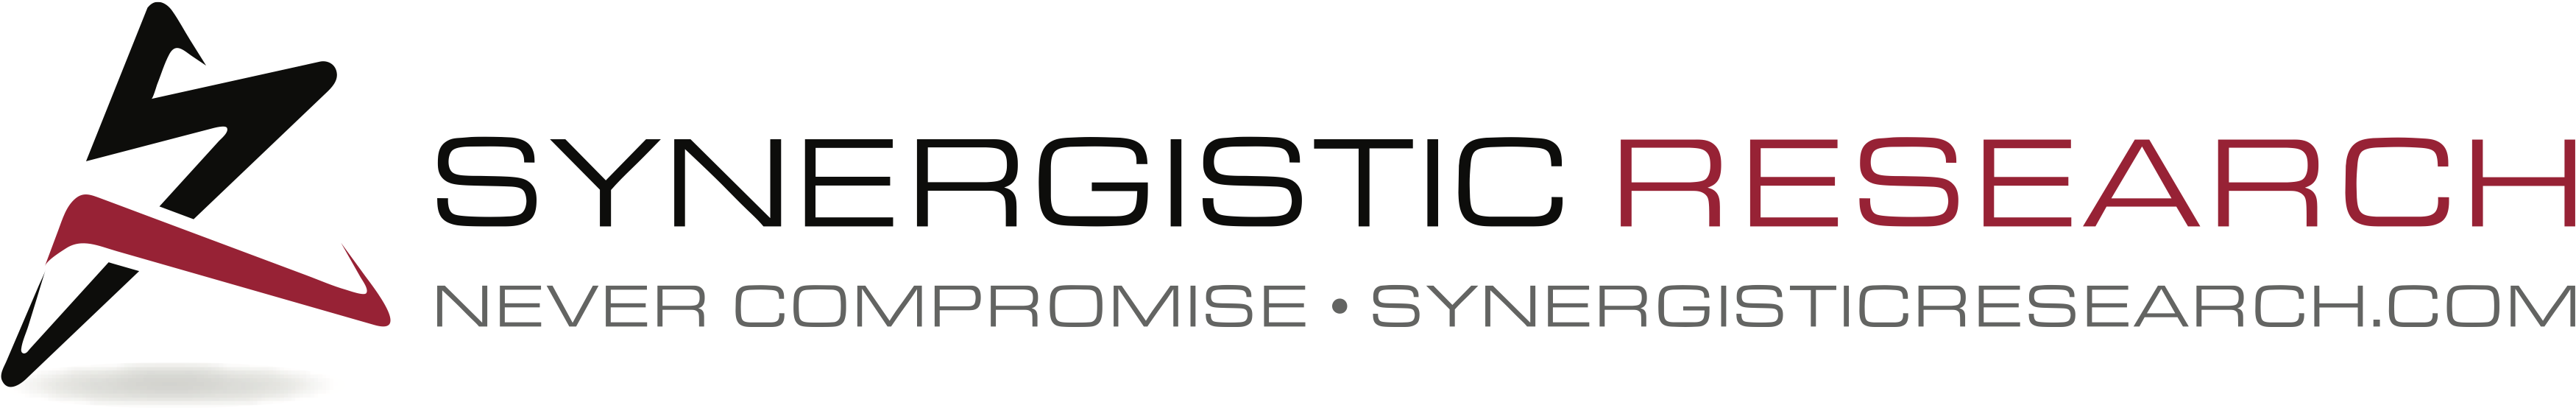 Synergistic Research logo